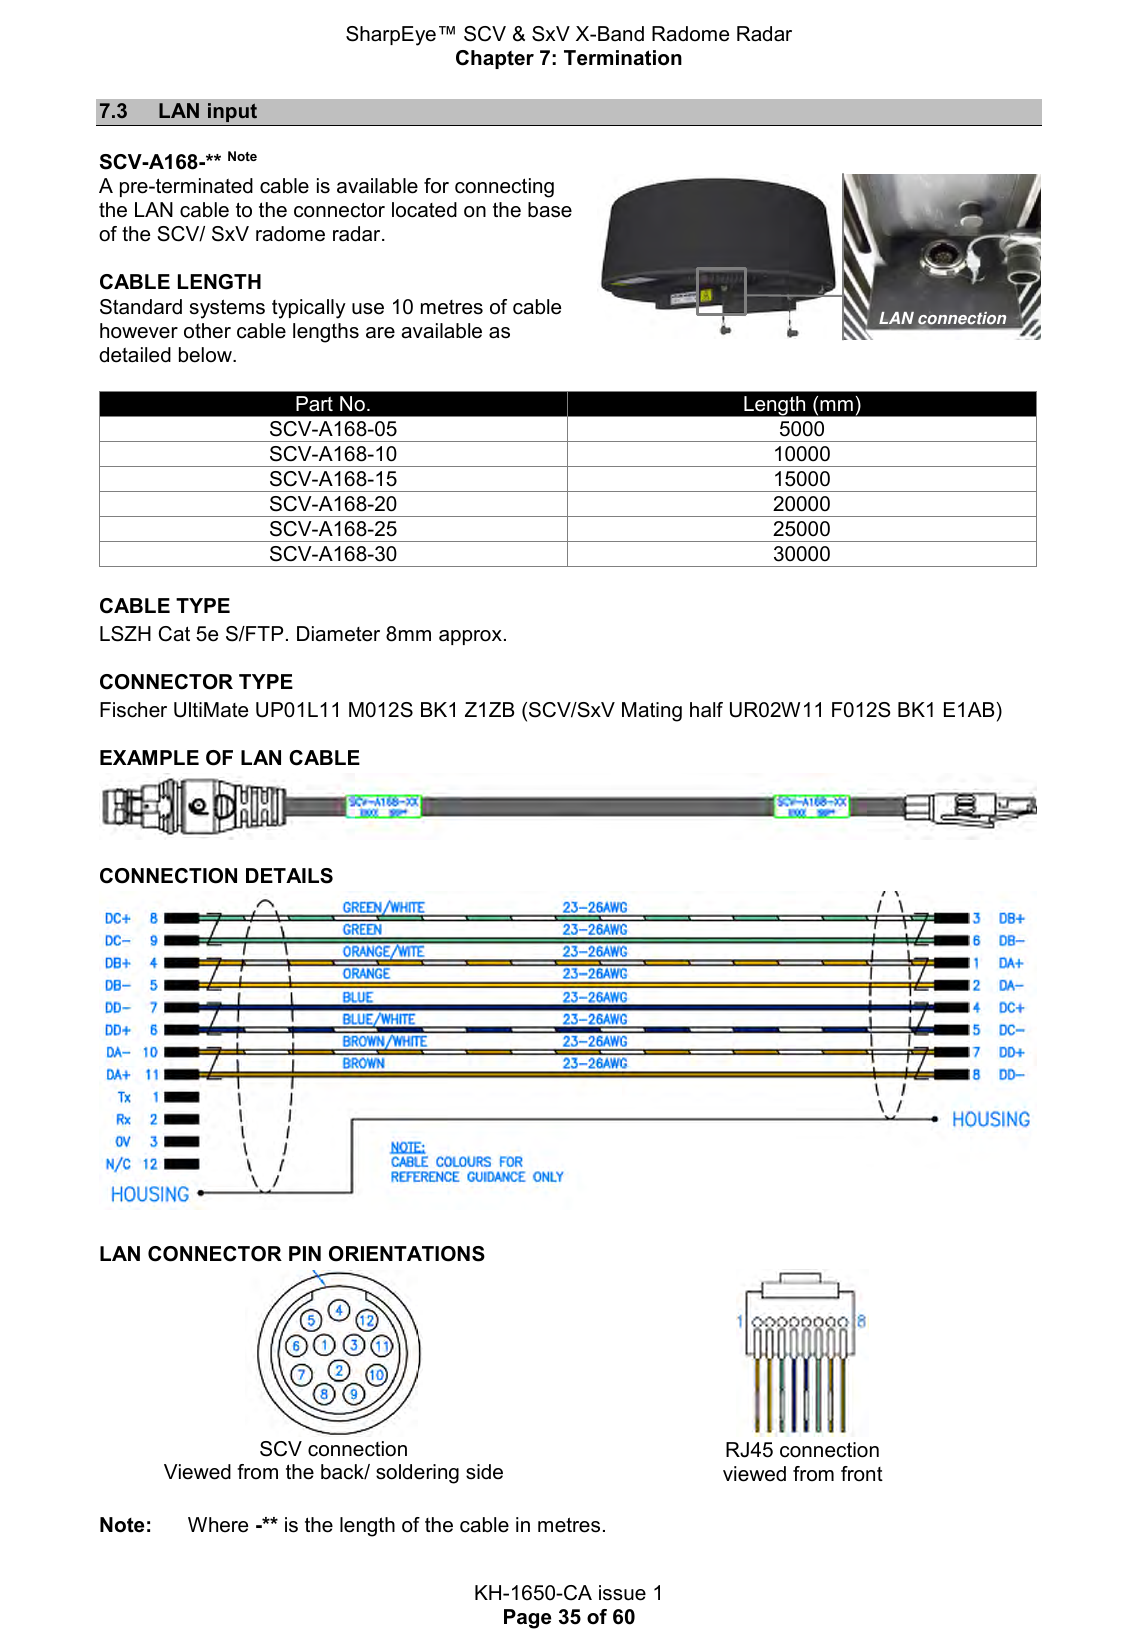 SharpEye™ SCV &amp; SxV X-Band Radome Radar Chapter 7: Termination  KH-1650-CA issue 1 Page 35 of 60 7.3  LAN input  SCV-A168-** Note A pre-terminated cable is available for connecting the LAN cable to the connector located on the base of the SCV/ SxV radome radar. CABLE LENGTH Standard systems typically use 10 metres of cable however other cable lengths are available as detailed below.    Part No. Length (mm) SCV-A168-05 5000 SCV-A168-10 10000 SCV-A168-15 15000 SCV-A168-20 20000 SCV-A168-25 25000 SCV-A168-30 30000  CABLE TYPE LSZH Cat 5e S/FTP. Diameter 8mm approx. CONNECTOR TYPE Fischer UltiMate UP01L11 M012S BK1 Z1ZB (SCV/SxV Mating half UR02W11 F012S BK1 E1AB) EXAMPLE OF LAN CABLE  CONNECTION DETAILS   LAN CONNECTOR PIN ORIENTATIONS  SCV connection Viewed from the back/ soldering side  RJ45 connection viewed from front  Note:   Where -** is the length of the cable in metres. LAN connection 